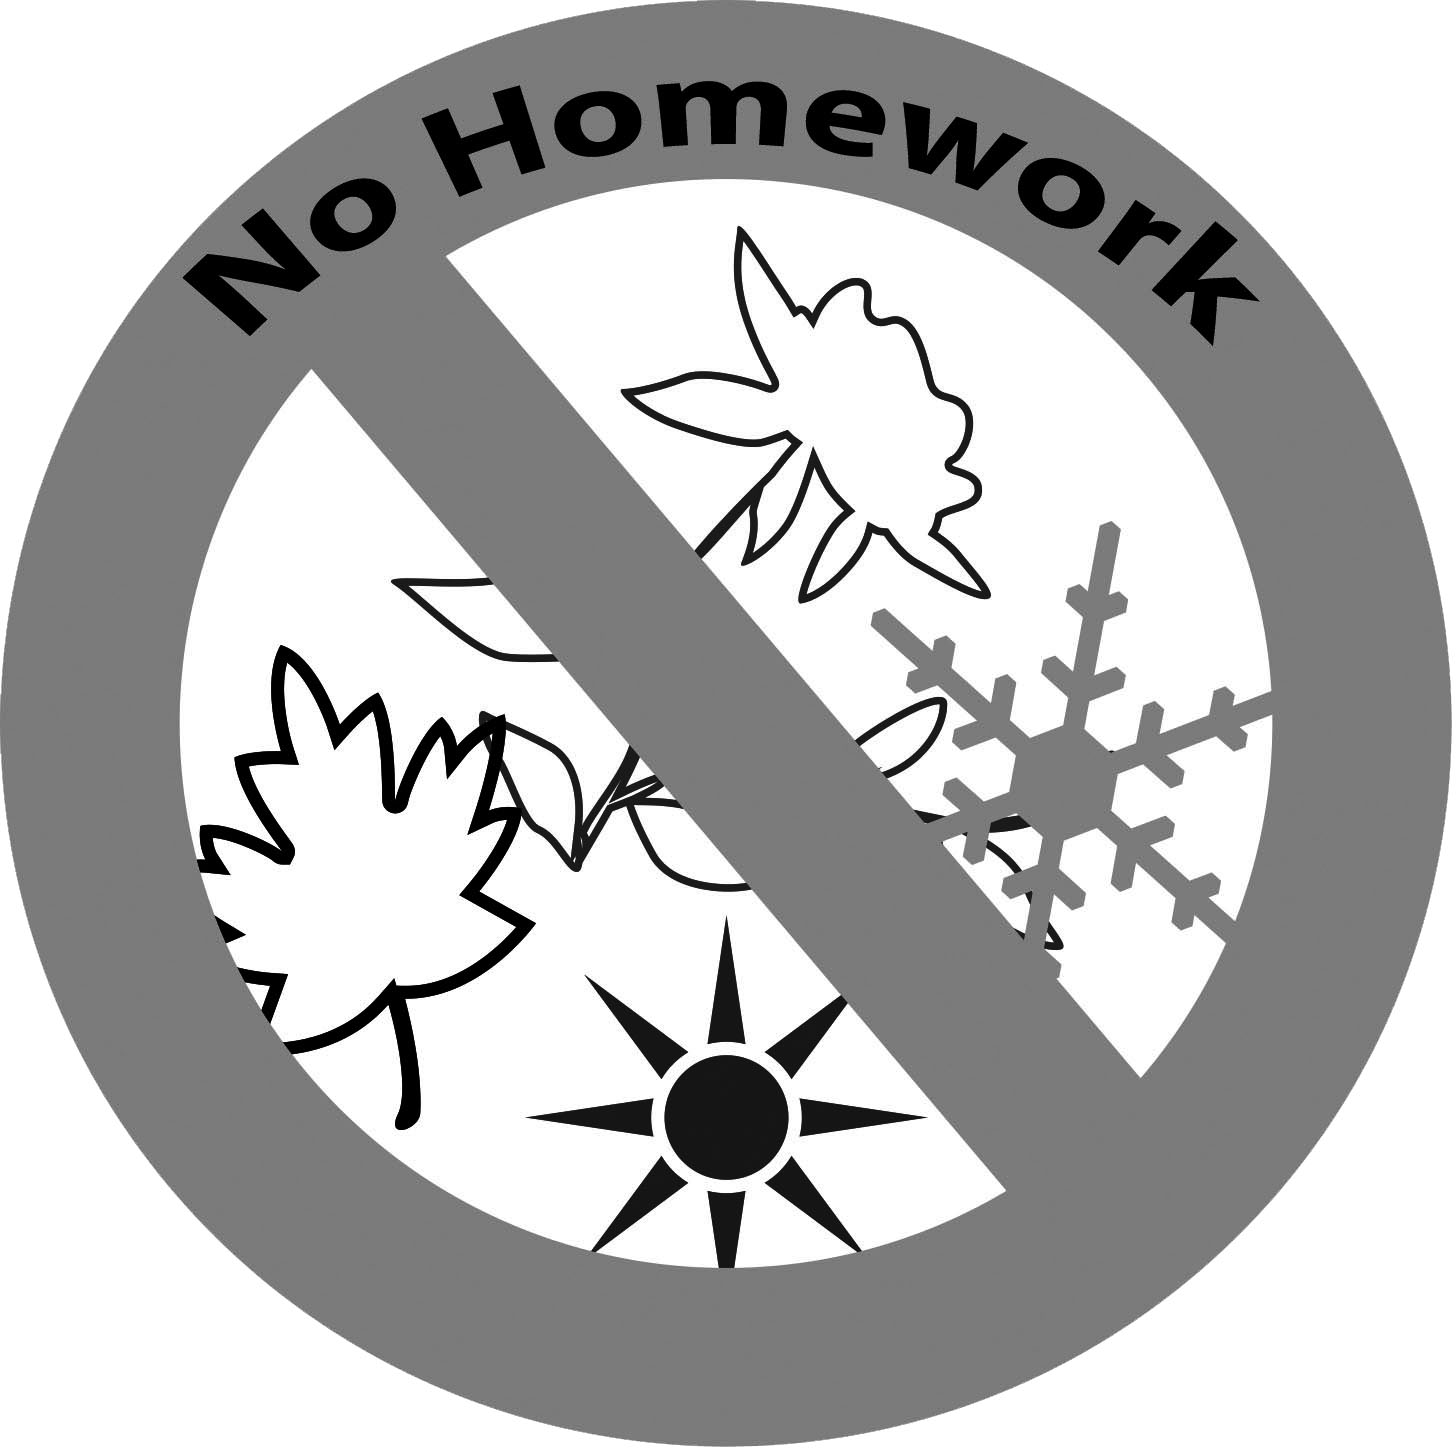 Homework policy ensures that there are no homework over vacation breaks.